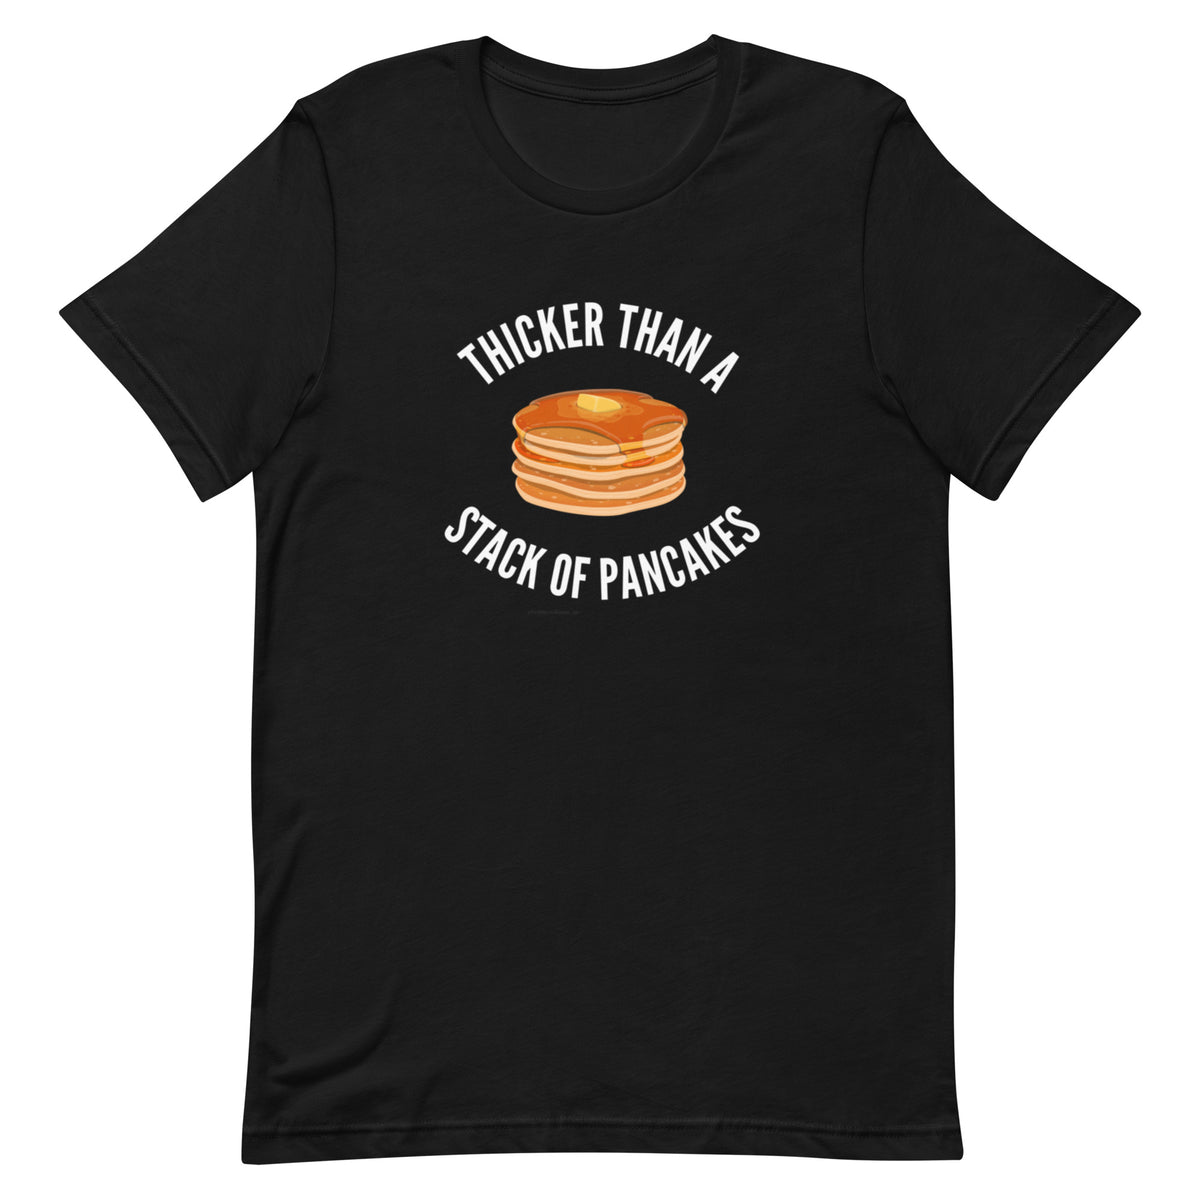 Thicker Than A Stack Of Pancakes T-Shirt